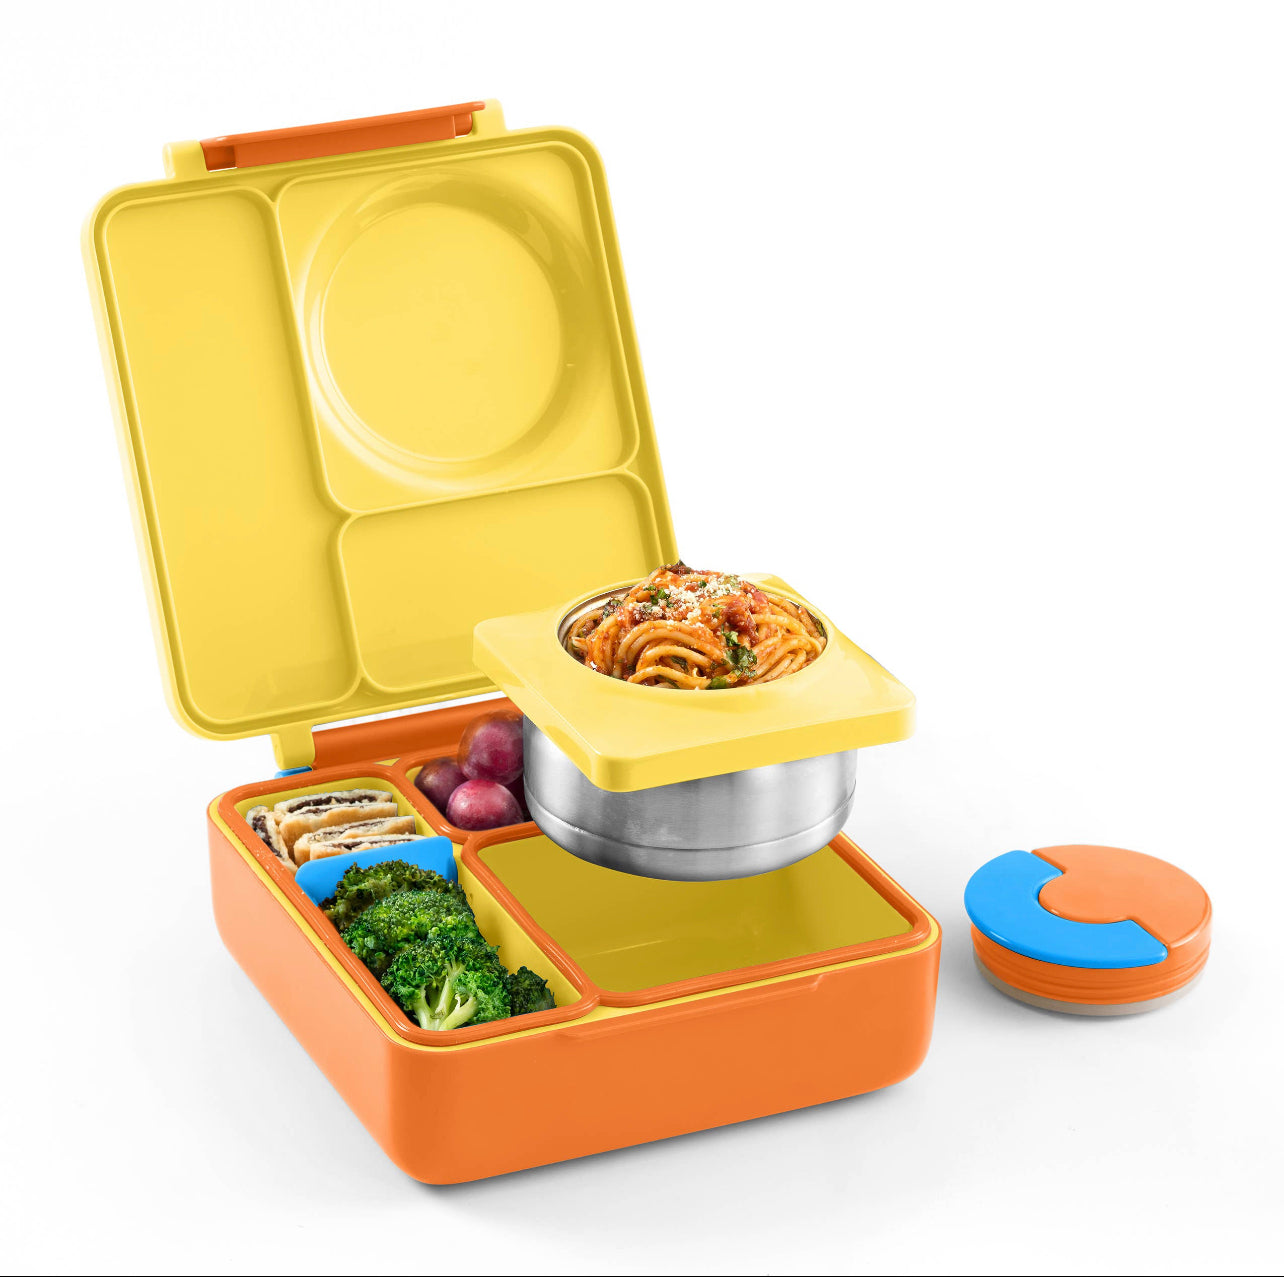 Stainless Steel 3-in-1 Bento Lunch Box with Pod Insert - Holds 6